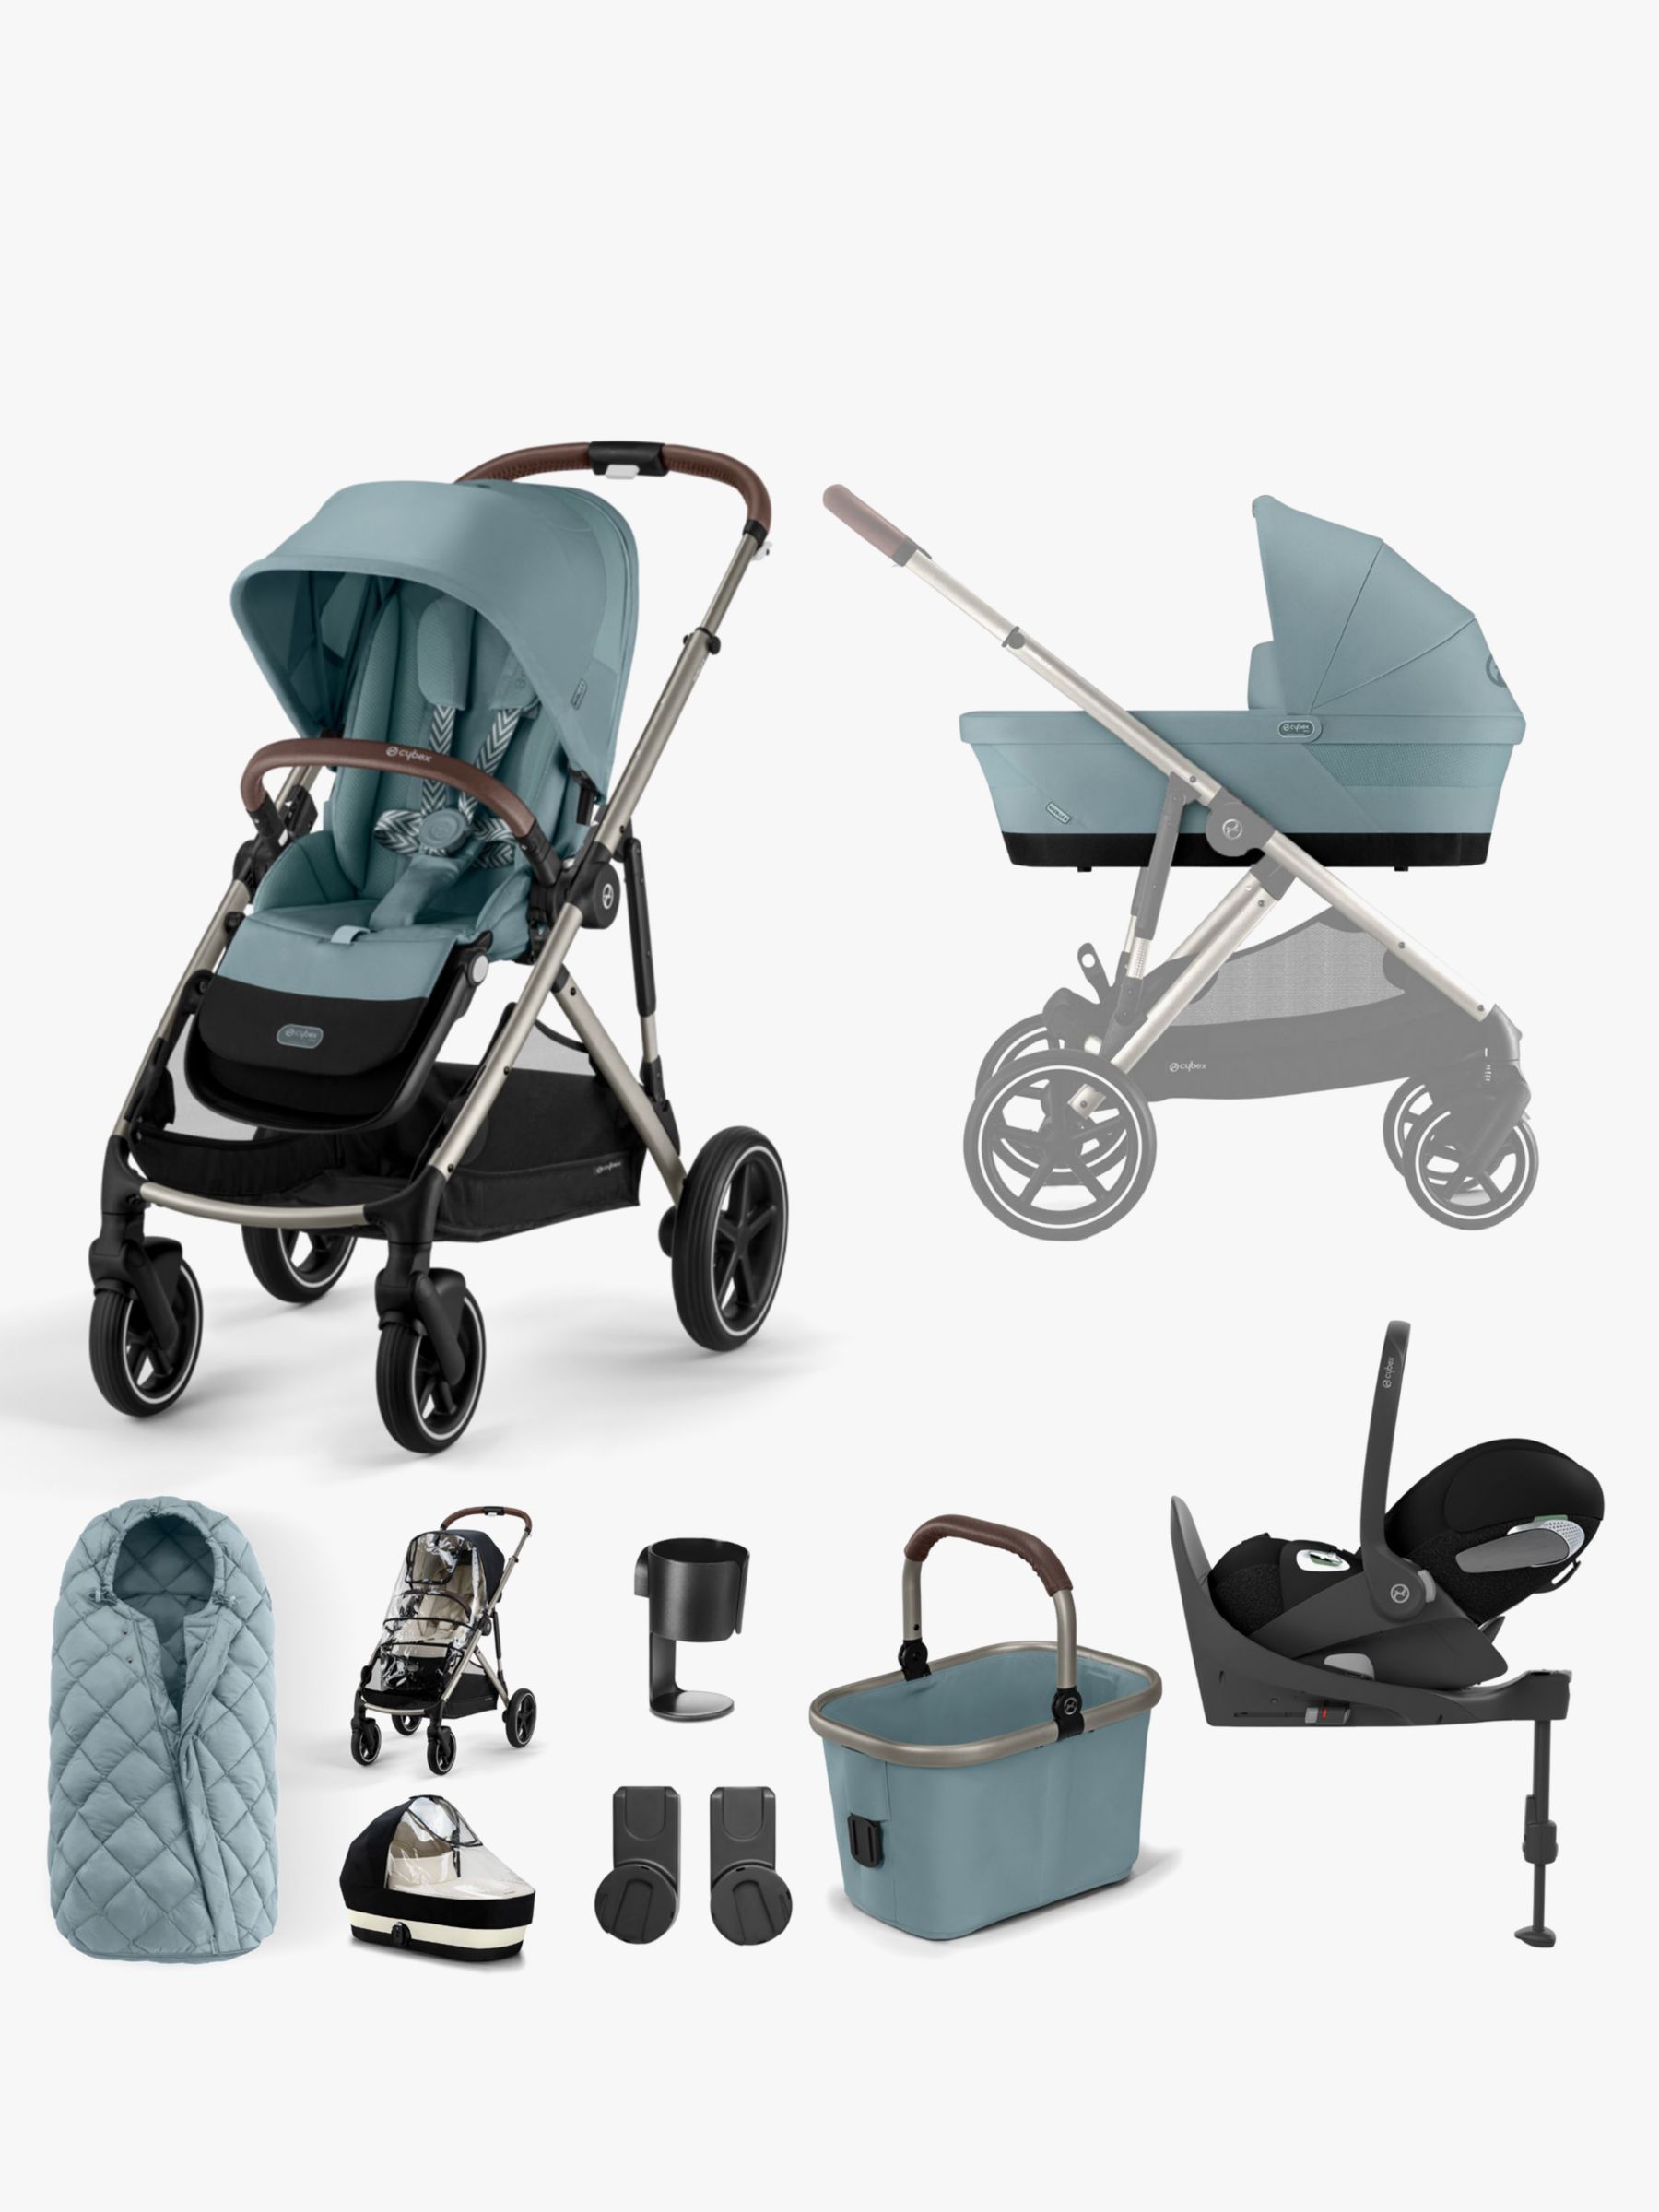 Uppababy Cruz V2 with Carrycot, Cybex Cloud Z and Isofix Base